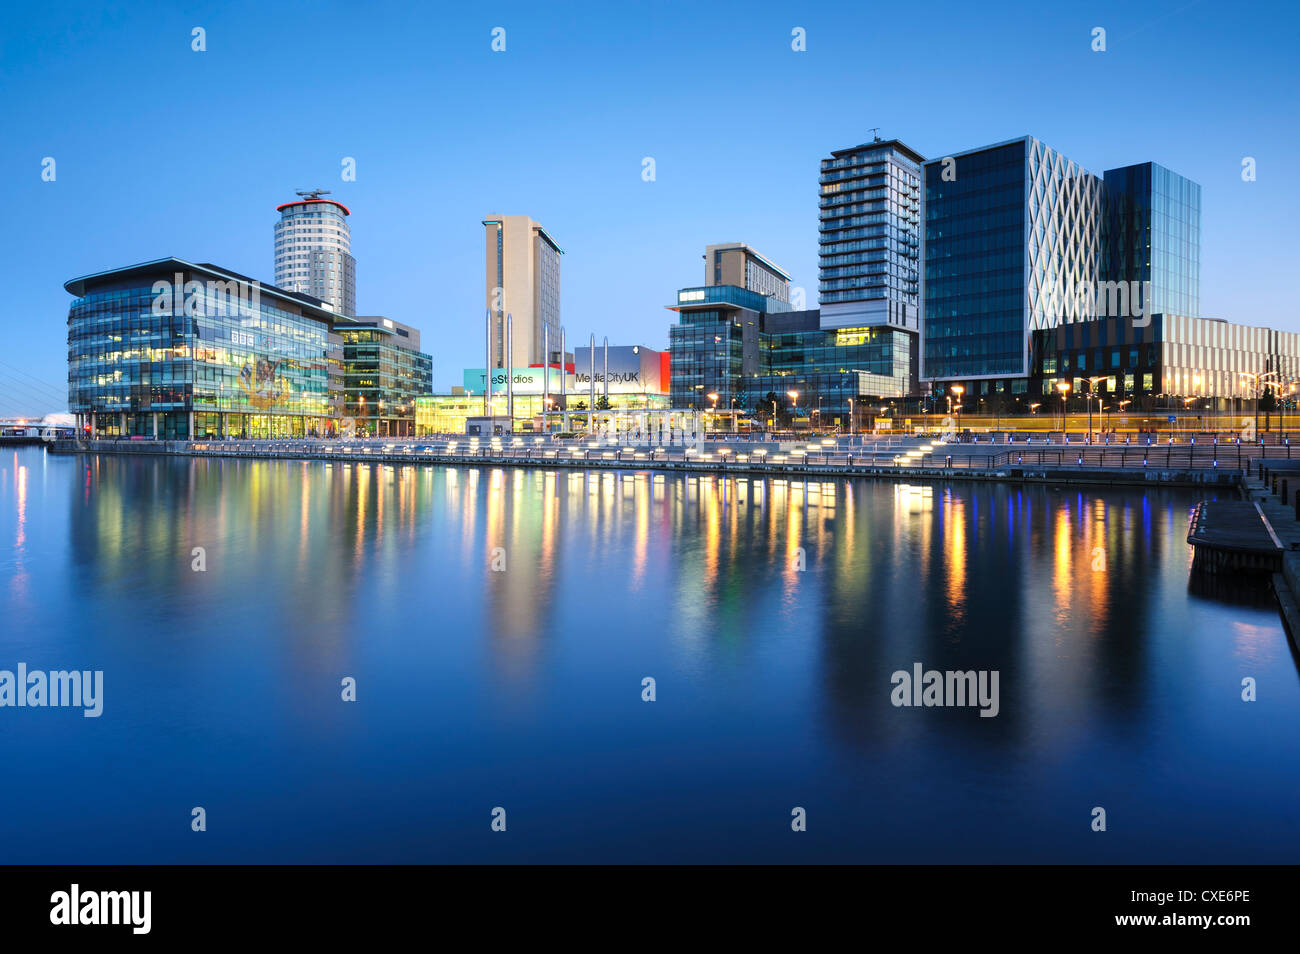 Dawn at MediaCity UK home of the BBC, Salford Quays, Manchester, Greater Manchester, England, United Kingdom, Europe Stock Photo